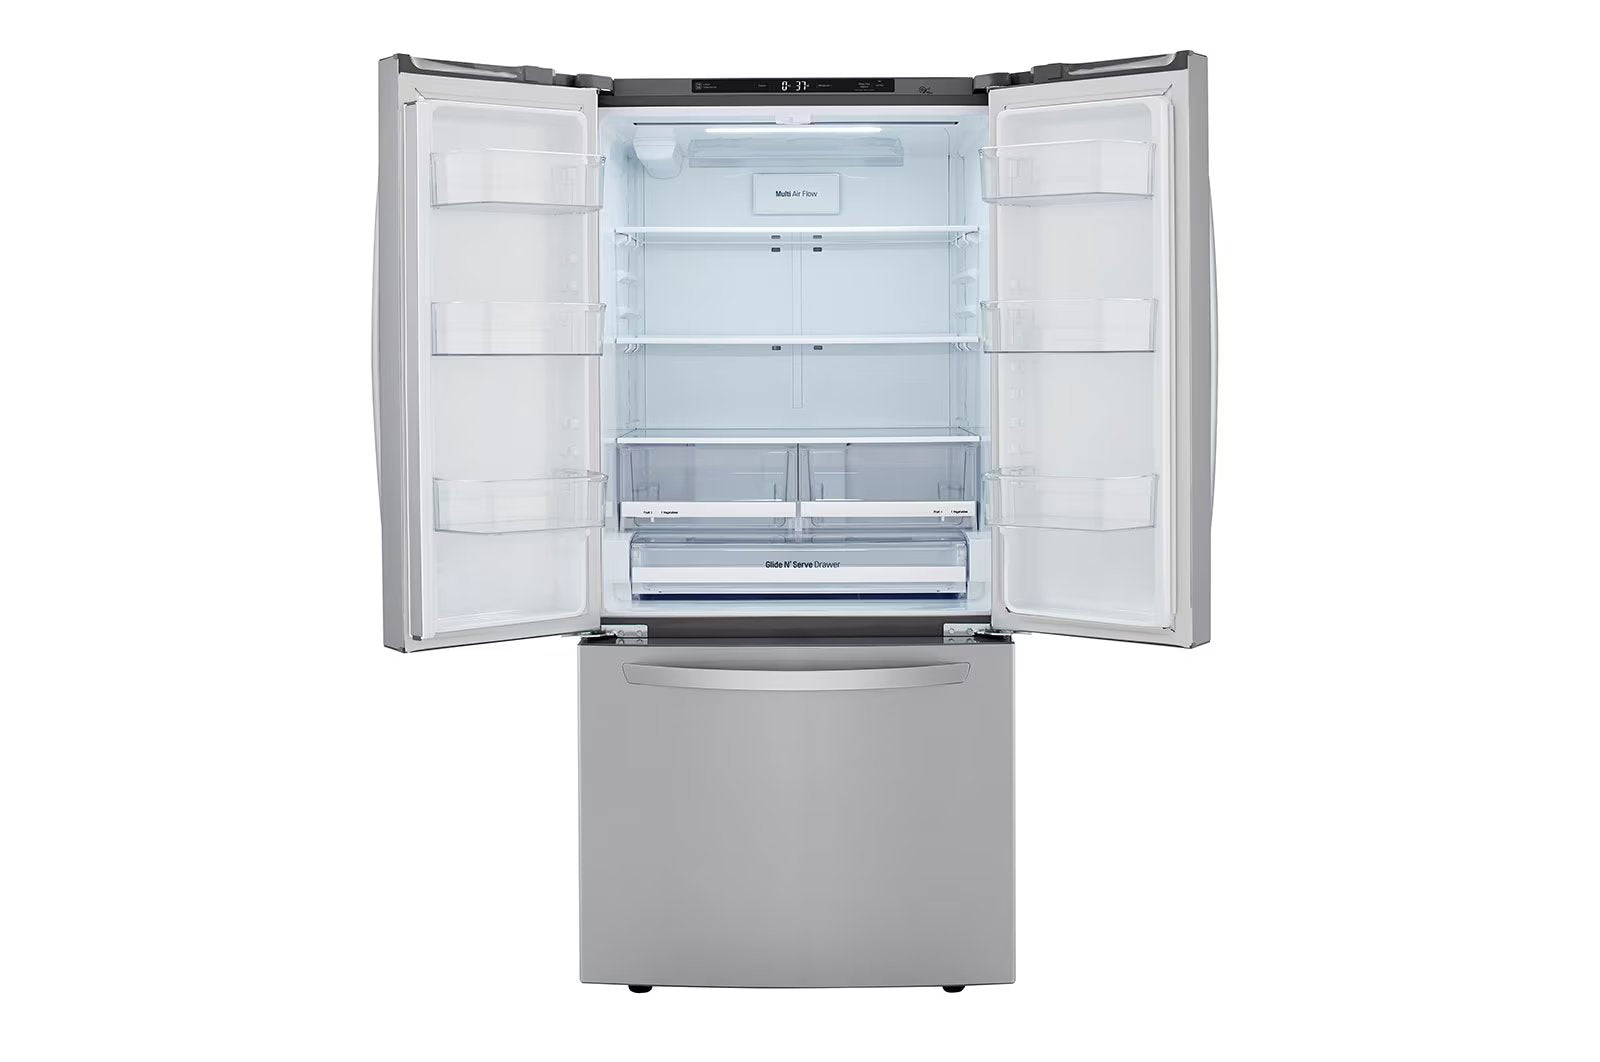 LG - 32.75 Inch 25.1 cu. ft French Door Refrigerator in Stainless - LRFVS2503S